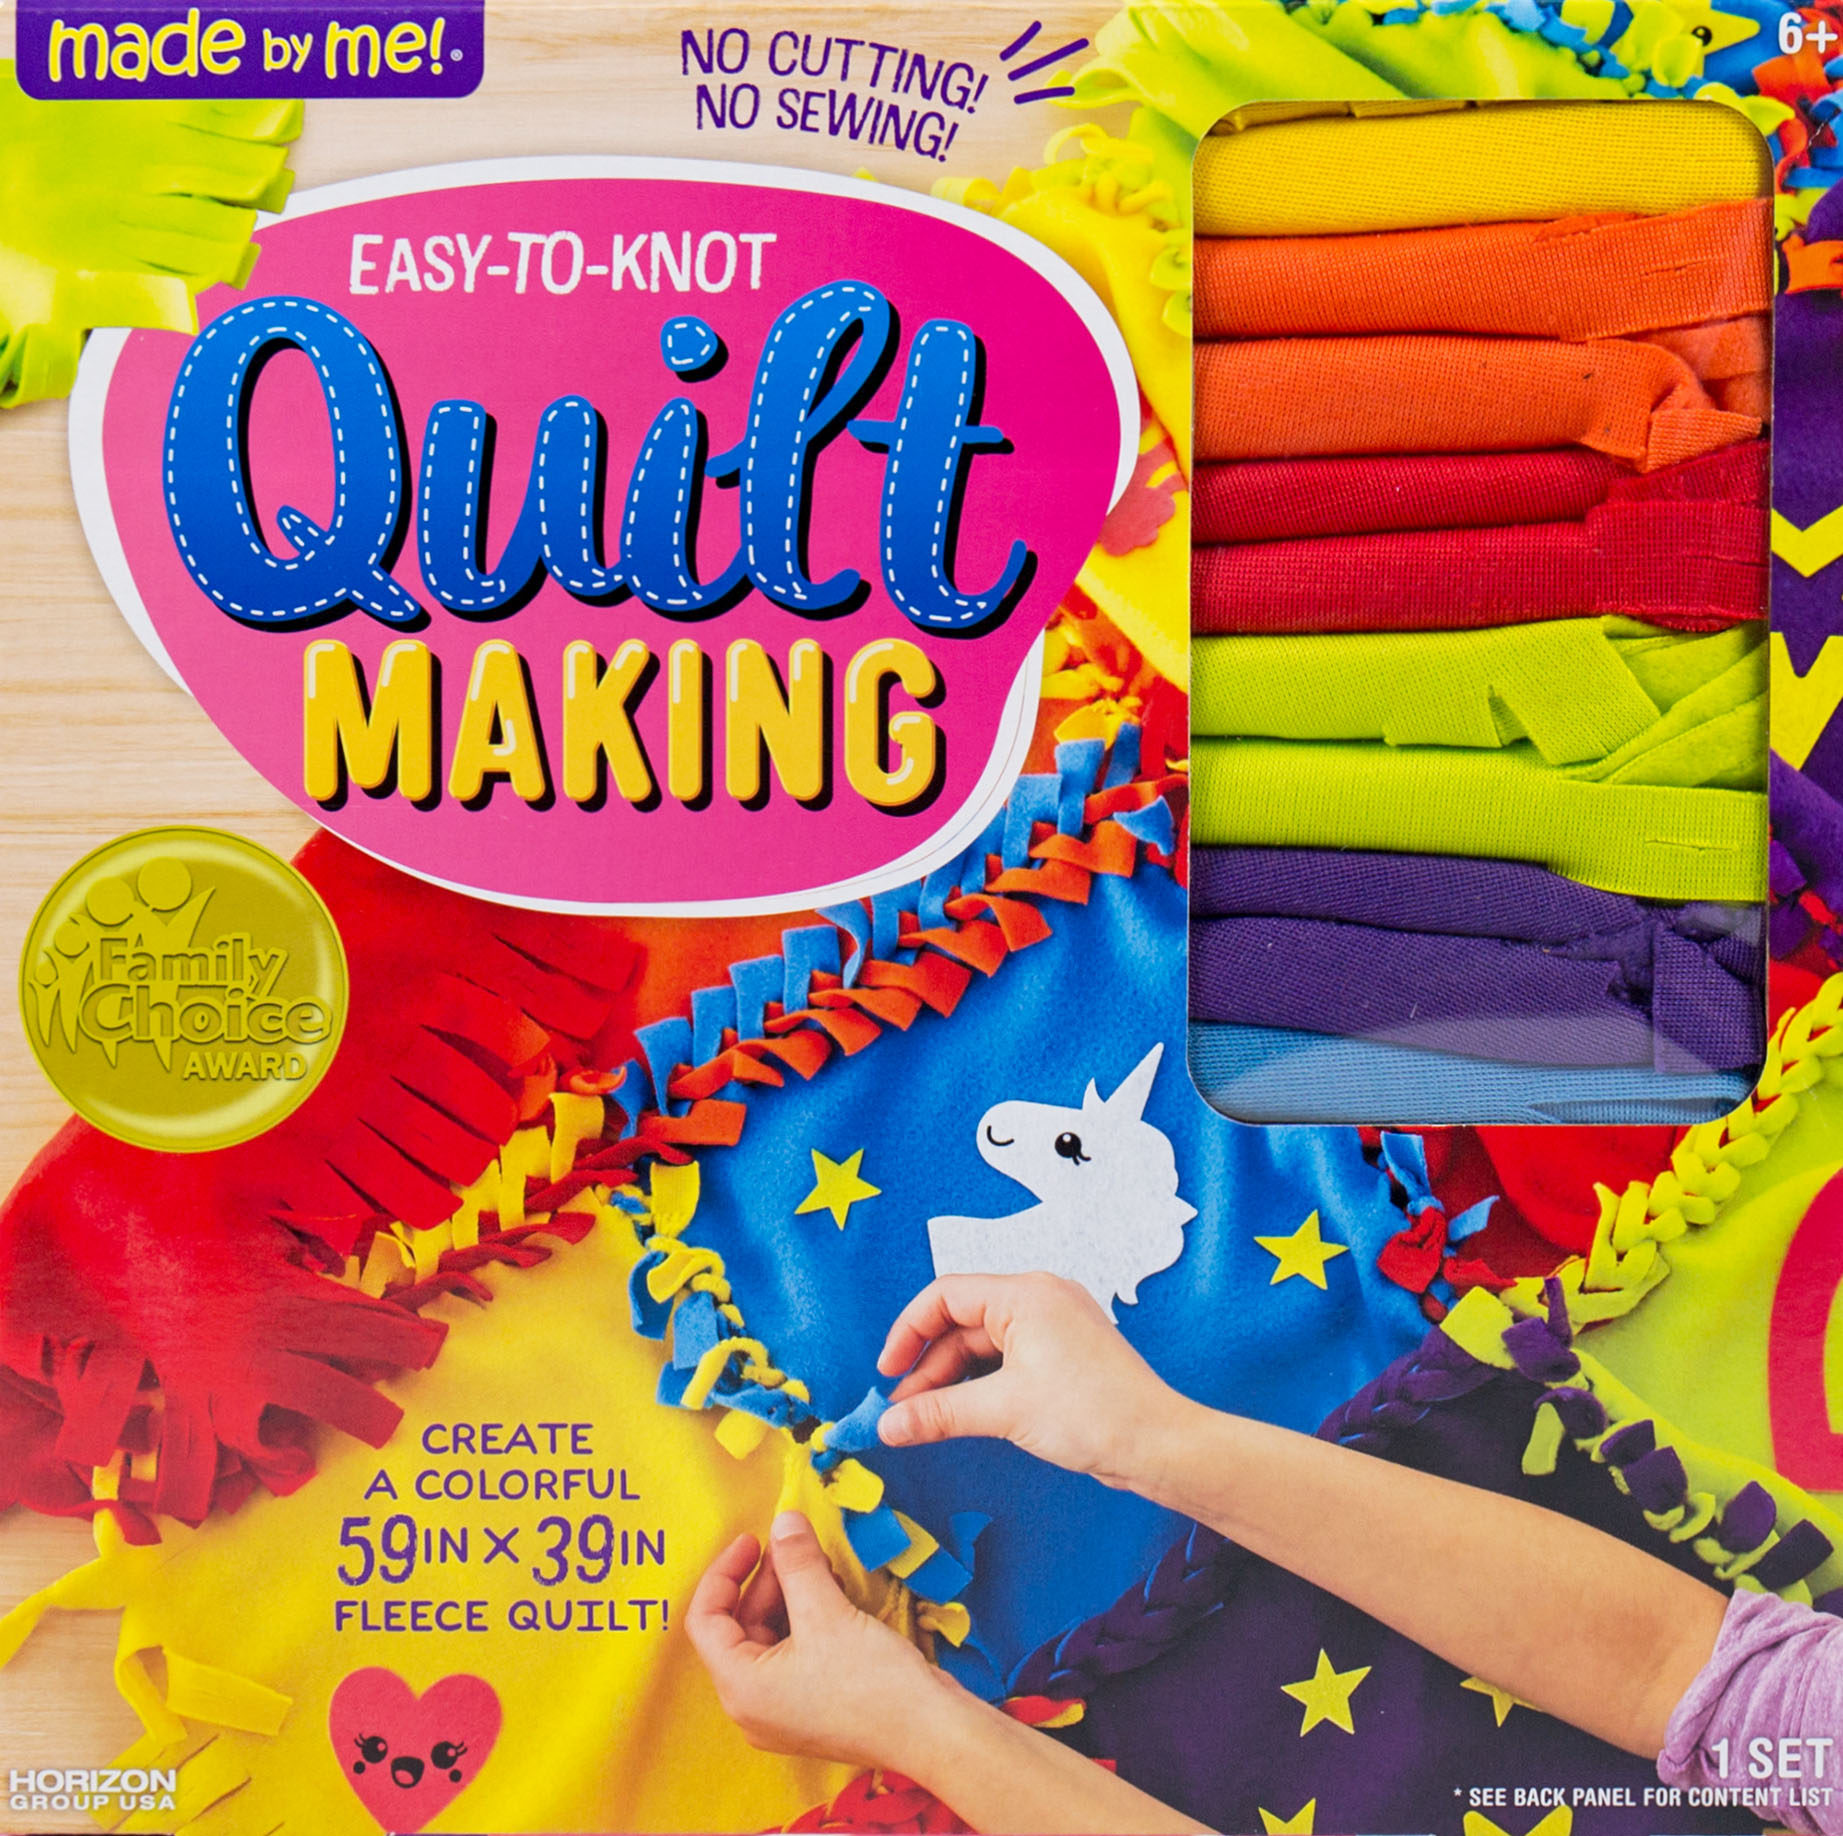 Made by Me Easy-to-Knot Quilt Making Kit, Colorful D.I.Y. Quilt, 6+